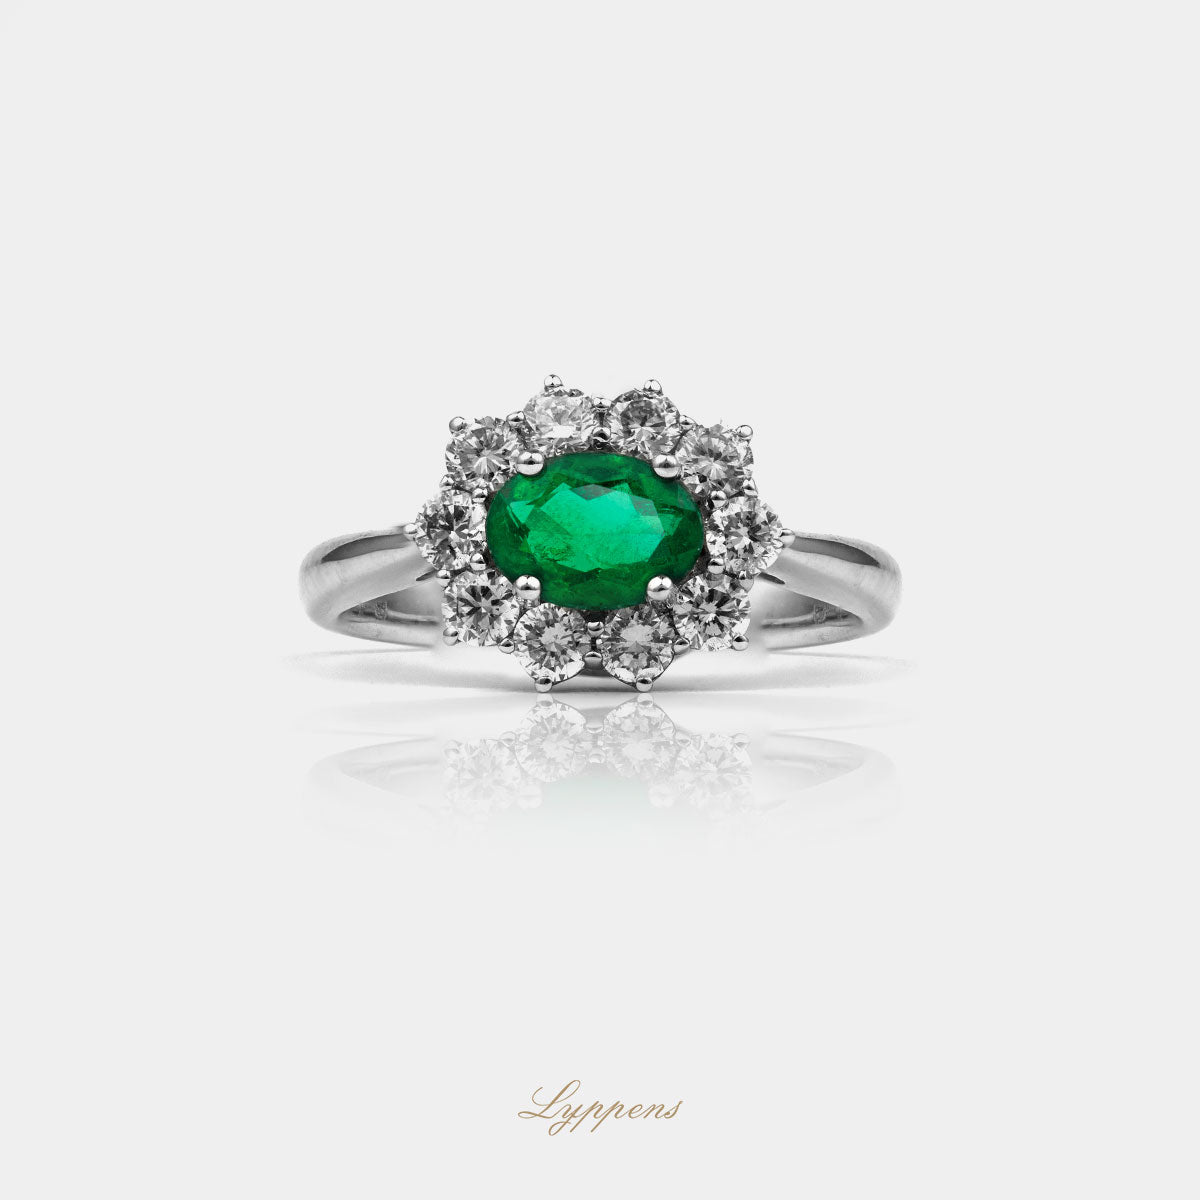 White gold entourage ring with emerald and diamonds